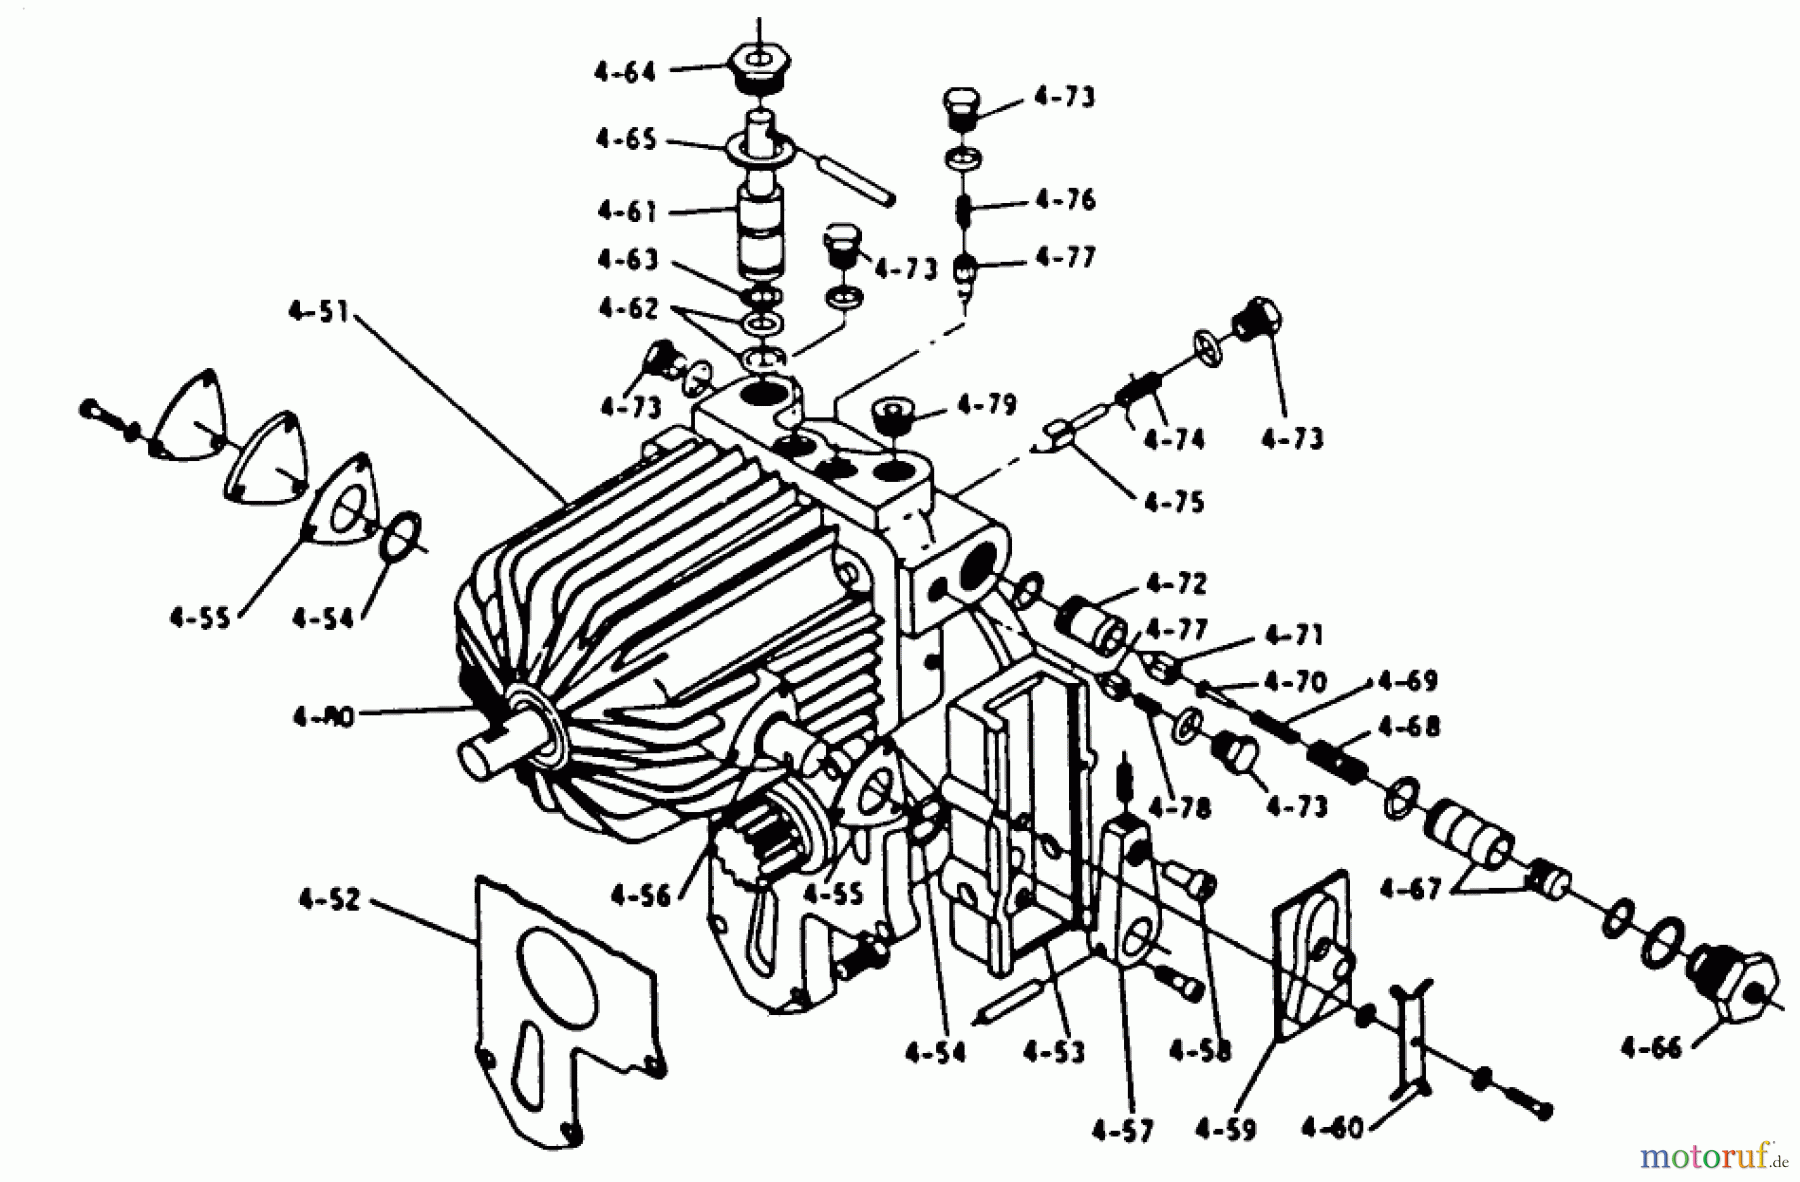  Toro Neu Mowers, Lawn & Garden Tractor Seite 1 1-0435 - Toro 14 hp Automatic Tractor, 1973 PARTS LIST FOR 4.050 HYDROGEAR (PLATE 4.4)